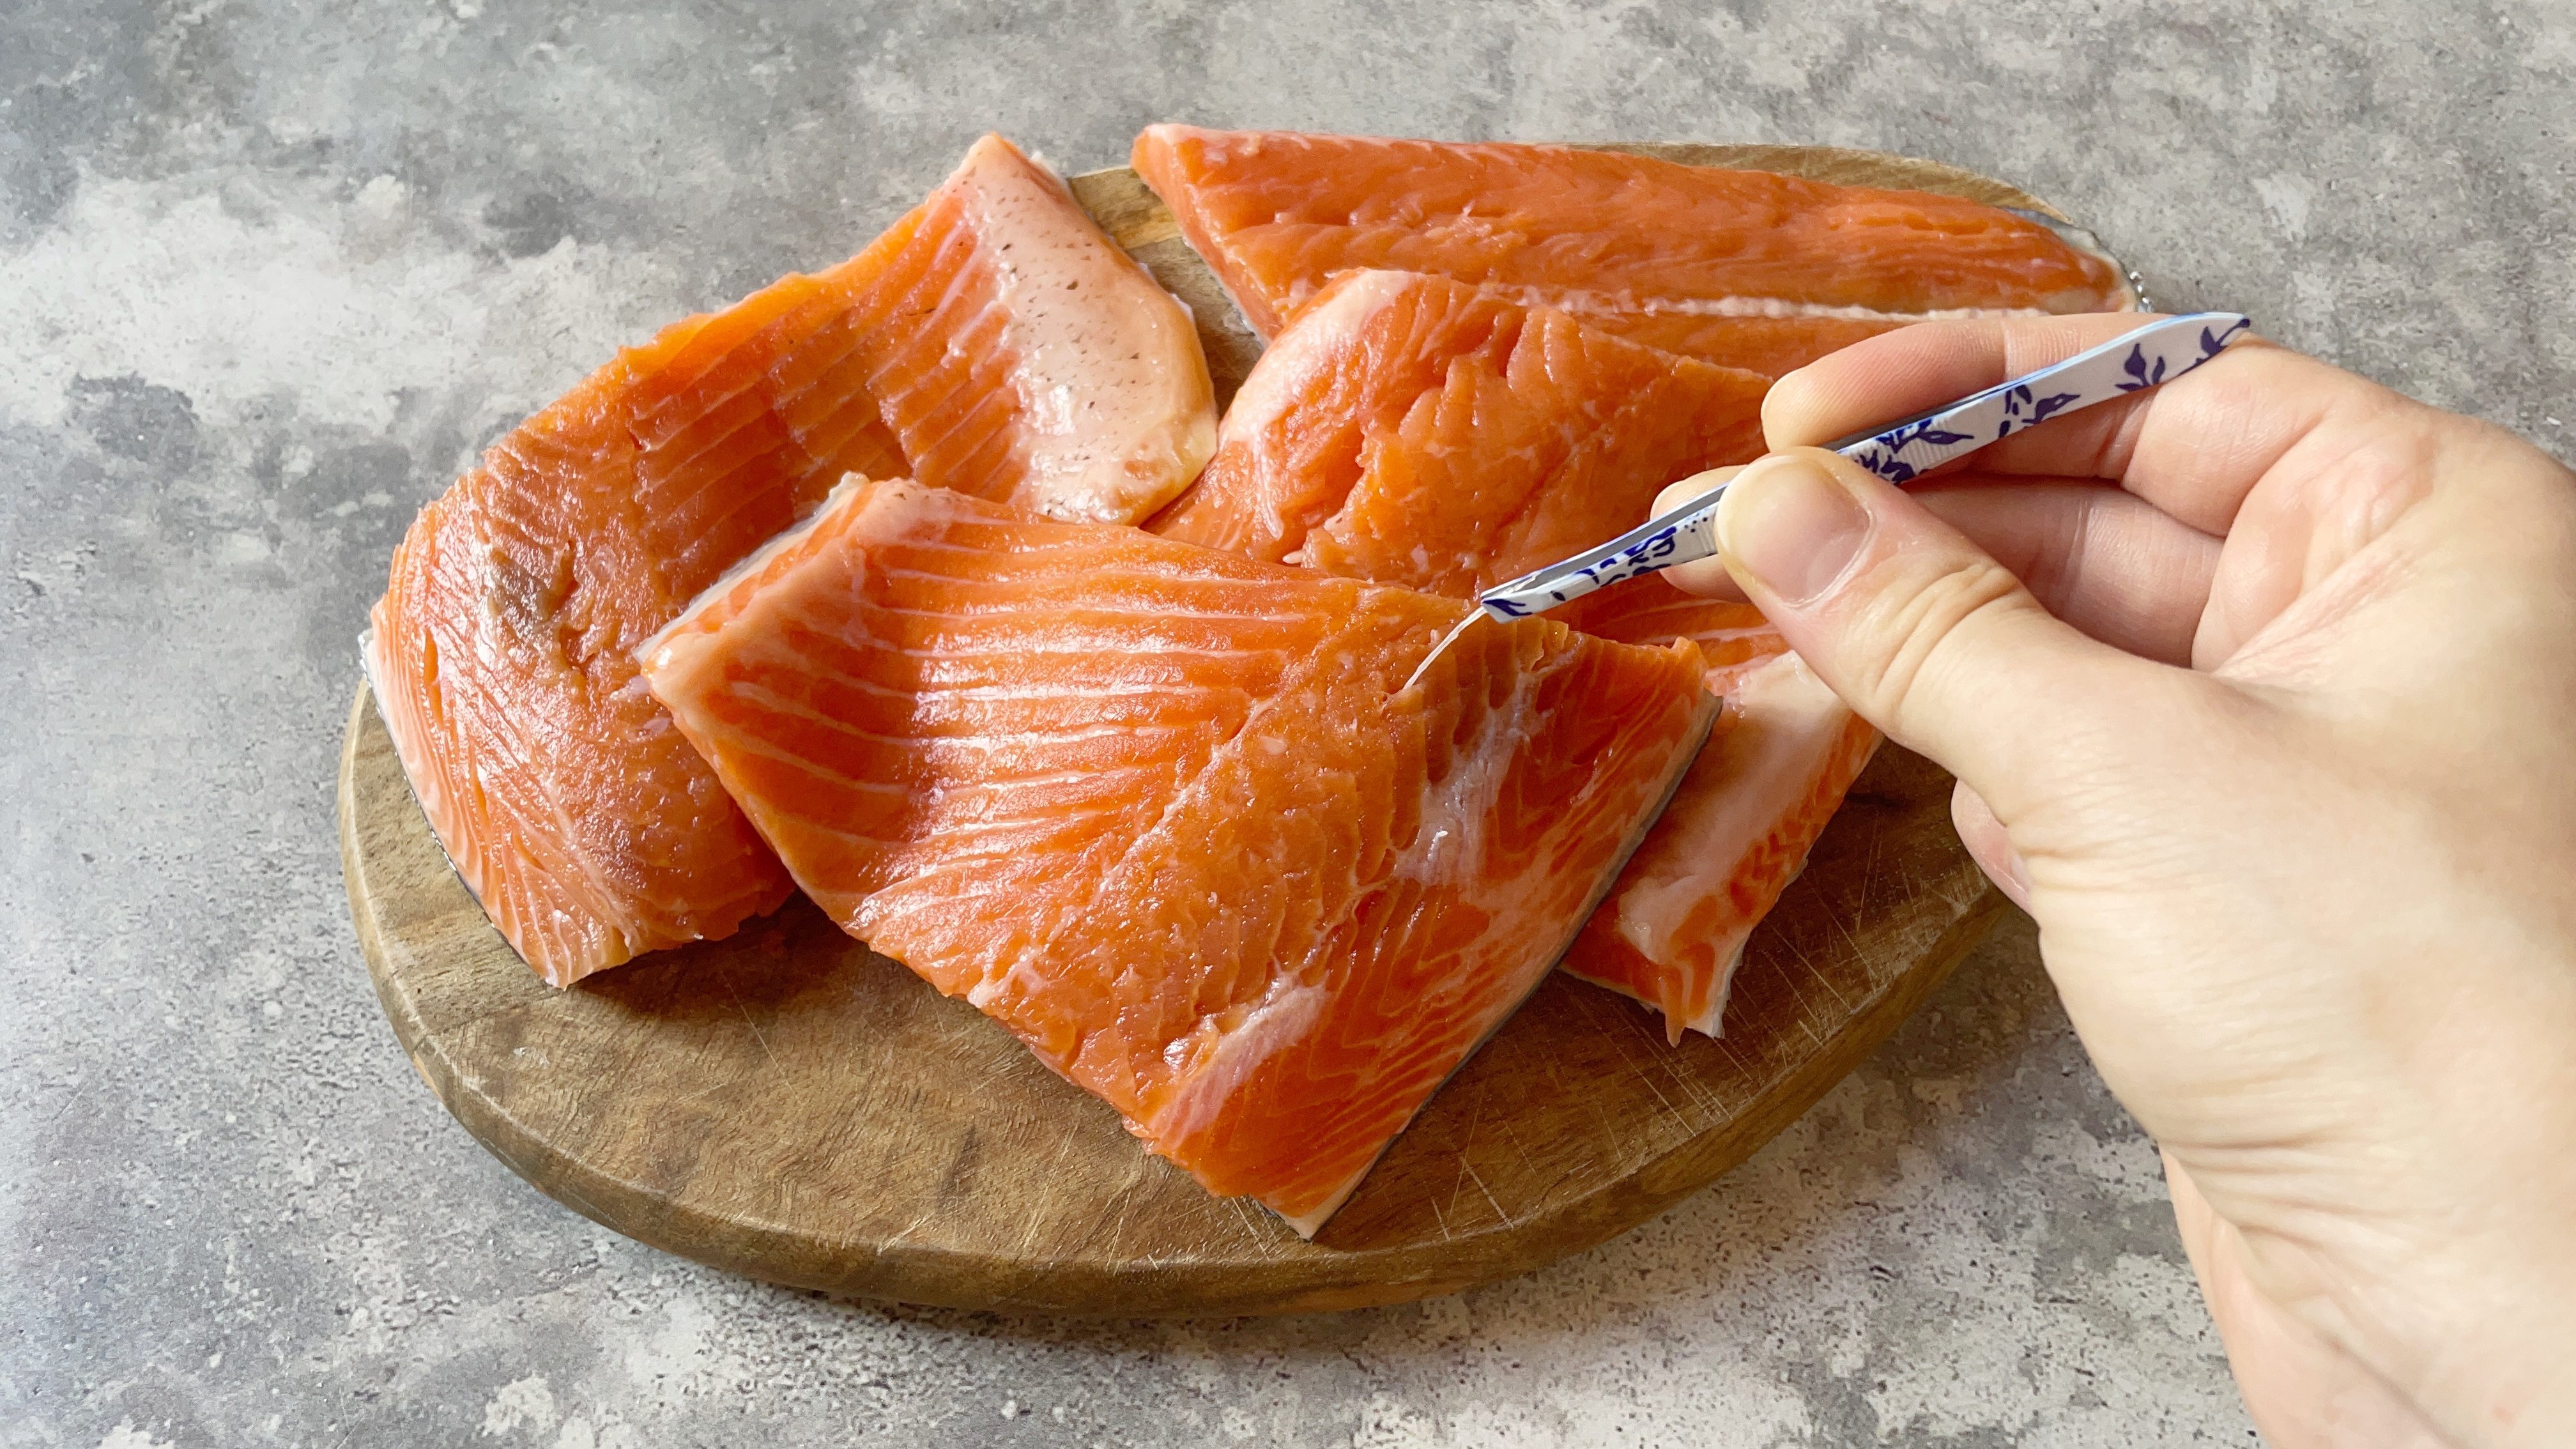 1658188679 329 Baked salmon trout fillets the recipe to prepare them tasty - August 20, 2022